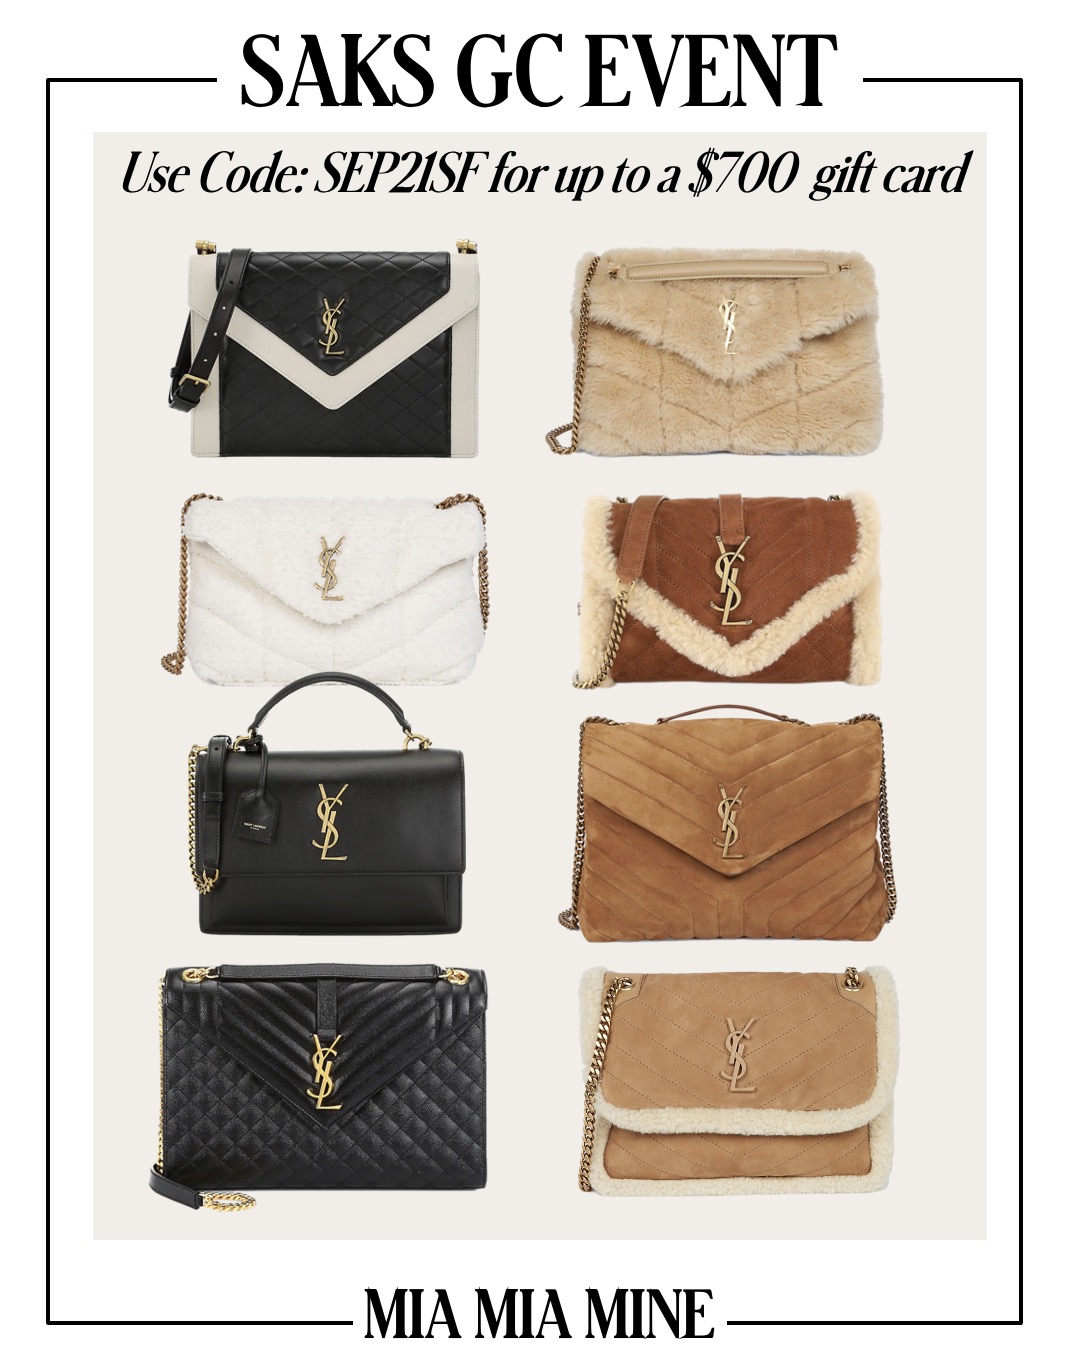 Fall Essentials To Score During The Saks Gift Card Event - Mia Mia Mine